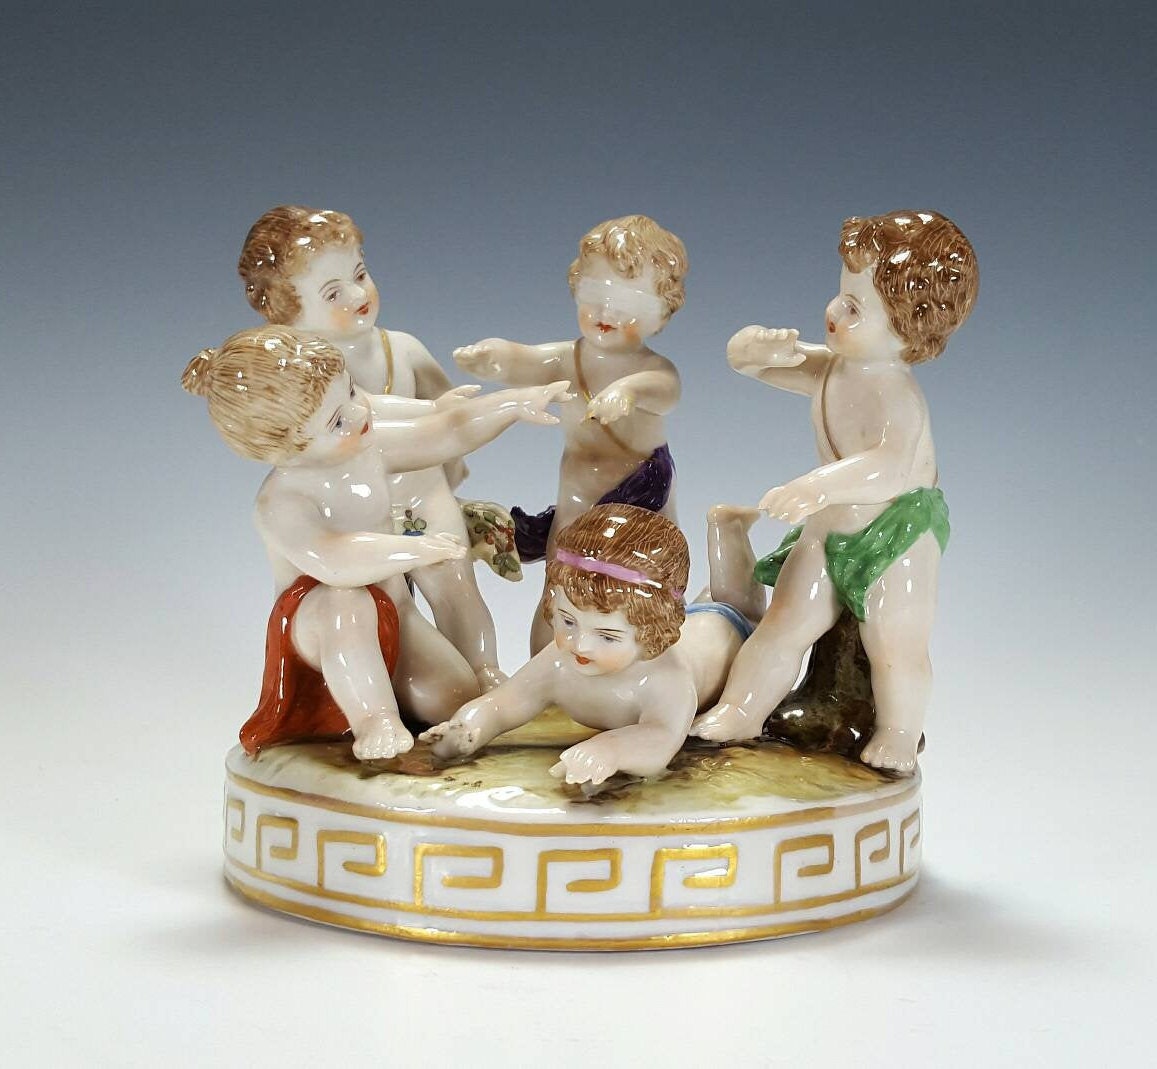 Porcelain Figurine Brands - Our Top 10 - Around The Block